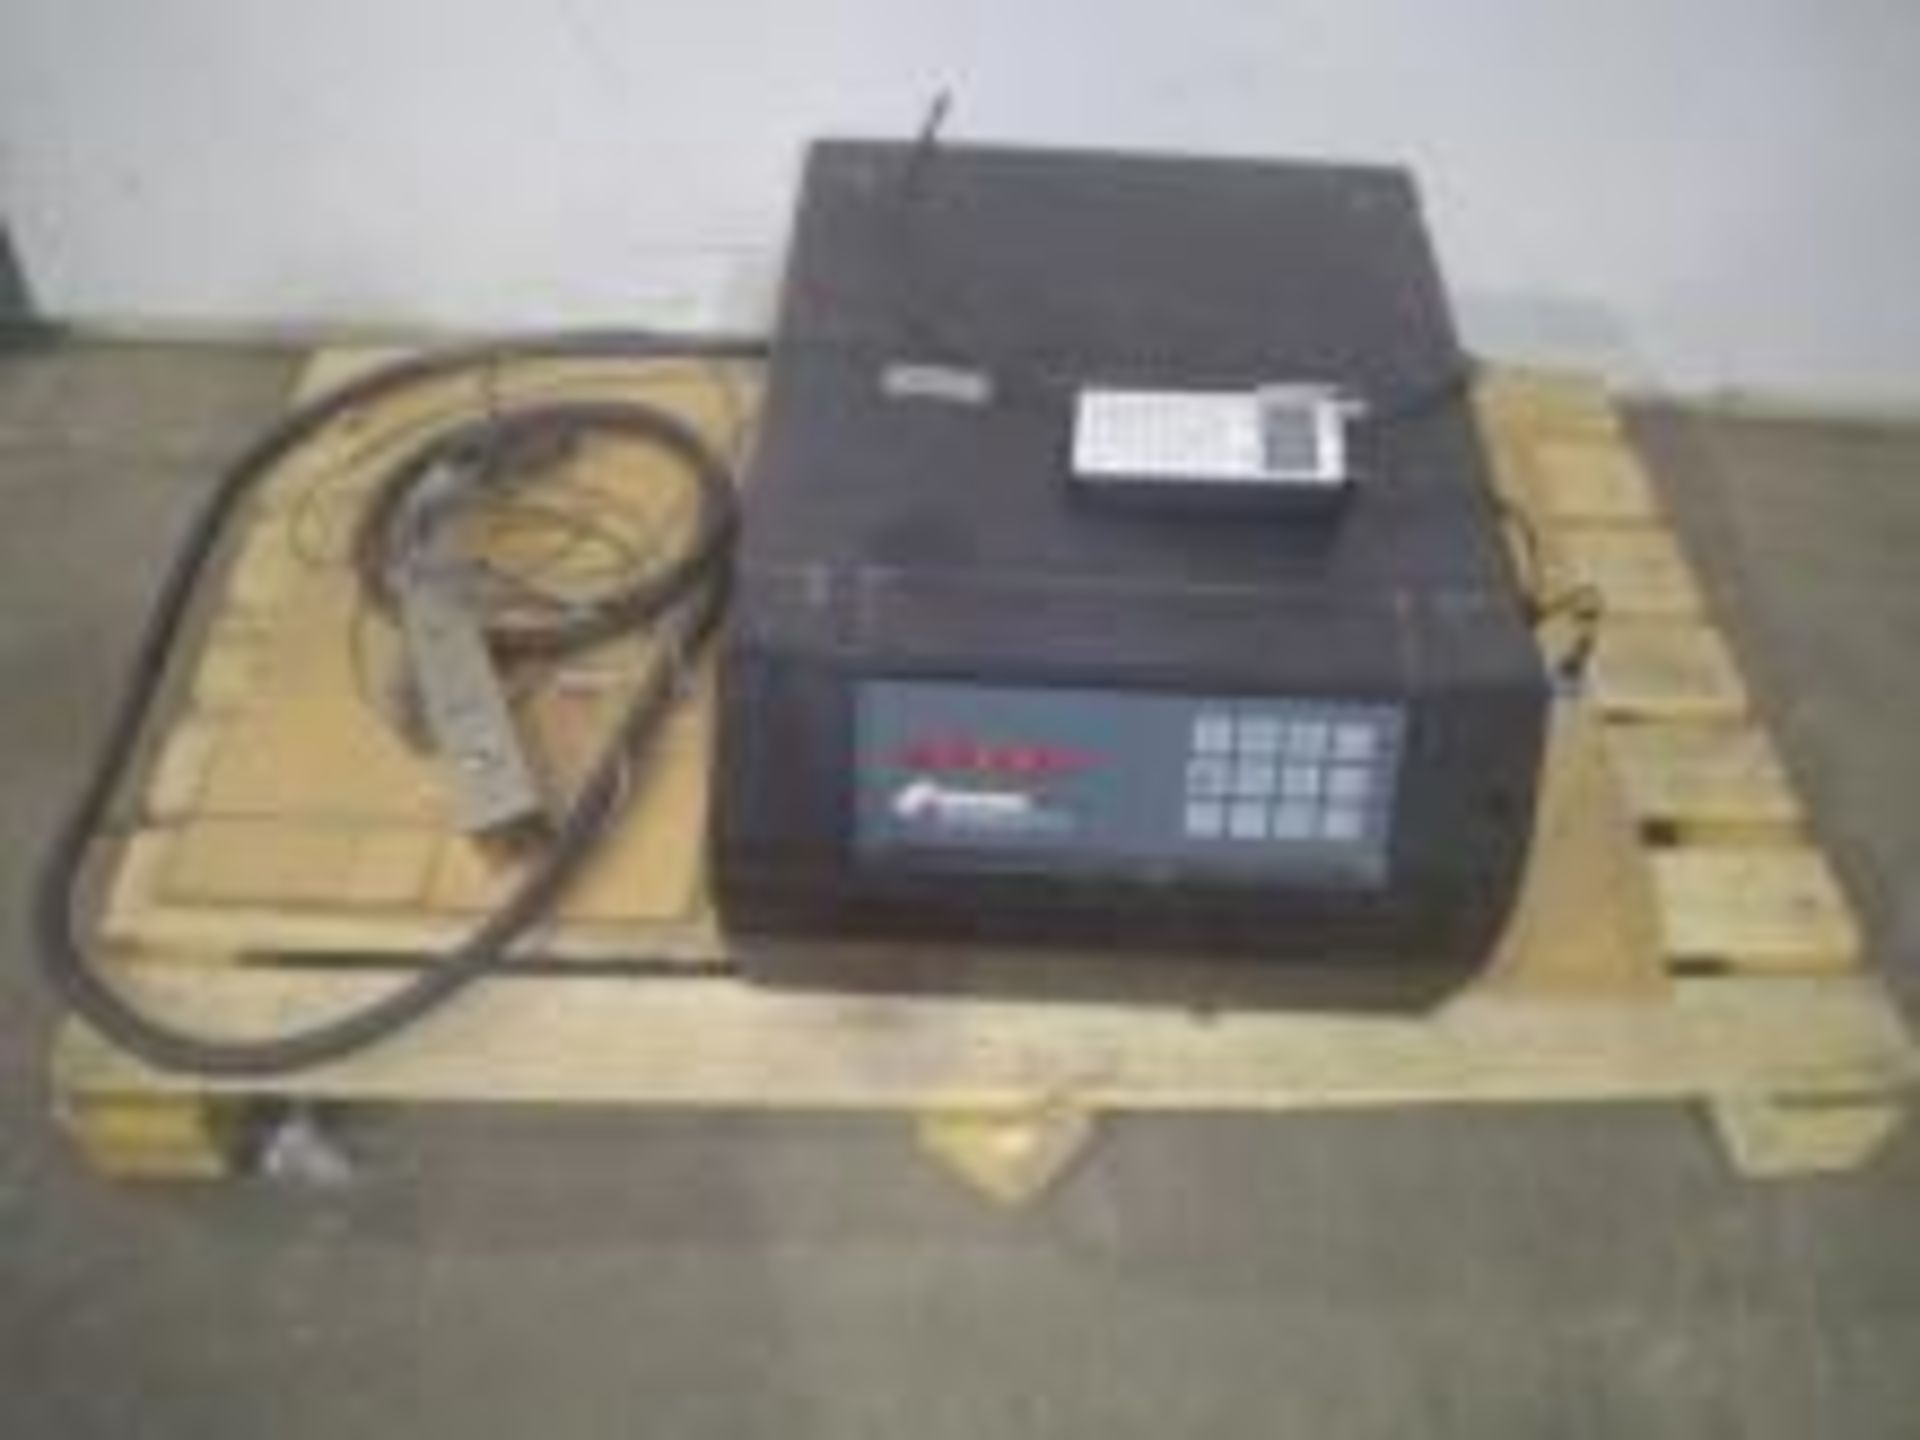 Used Domino CodexBox 2 Video Printer.   Electrics: 110 Volts. Load Out Fee:50